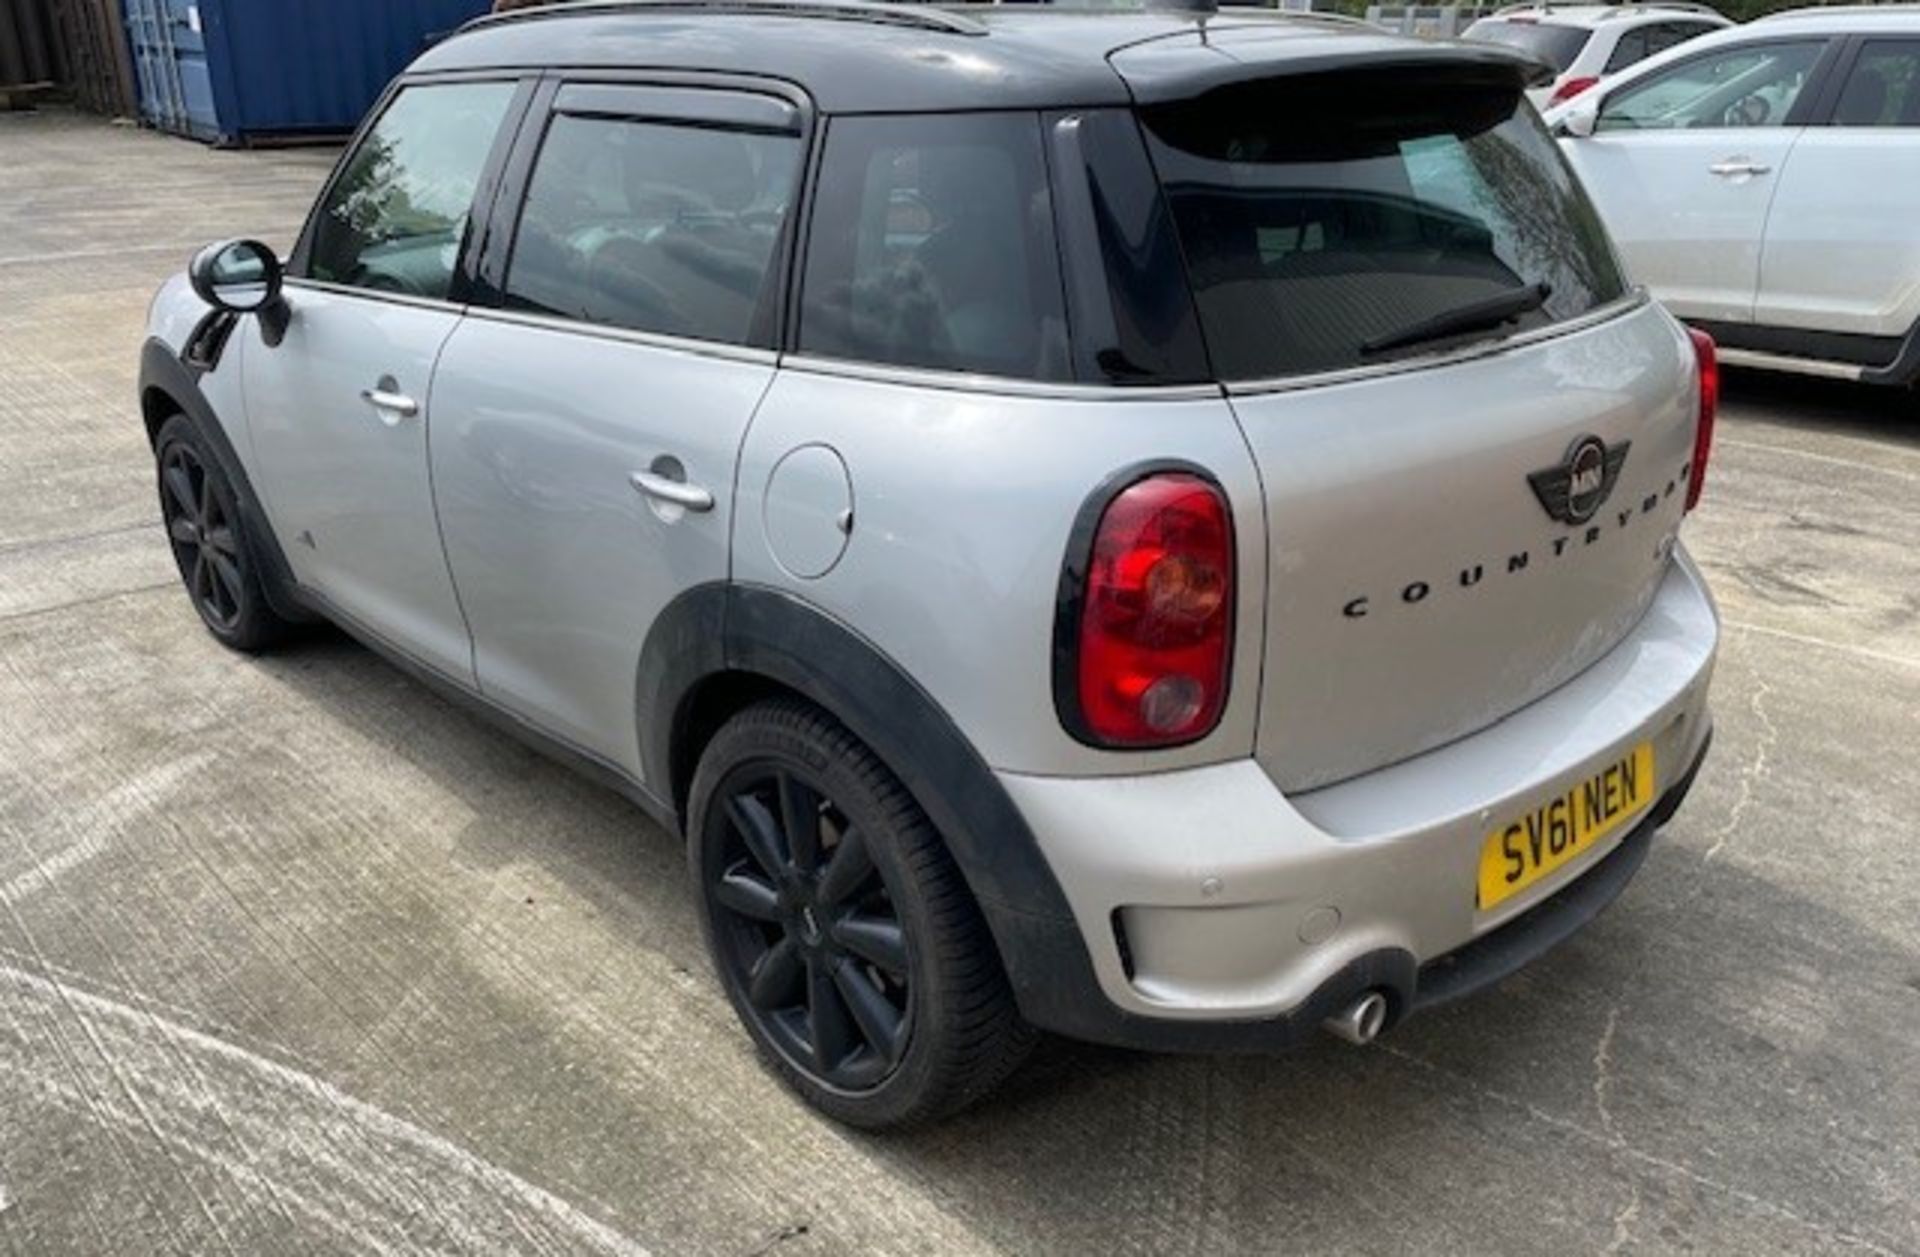 MINI COUNTRYMAN COOPER 2.0 SD ALL4 AUTOMATIC FIVE DOOR HATCHBACK - Diesel - Silver. - Image 4 of 9